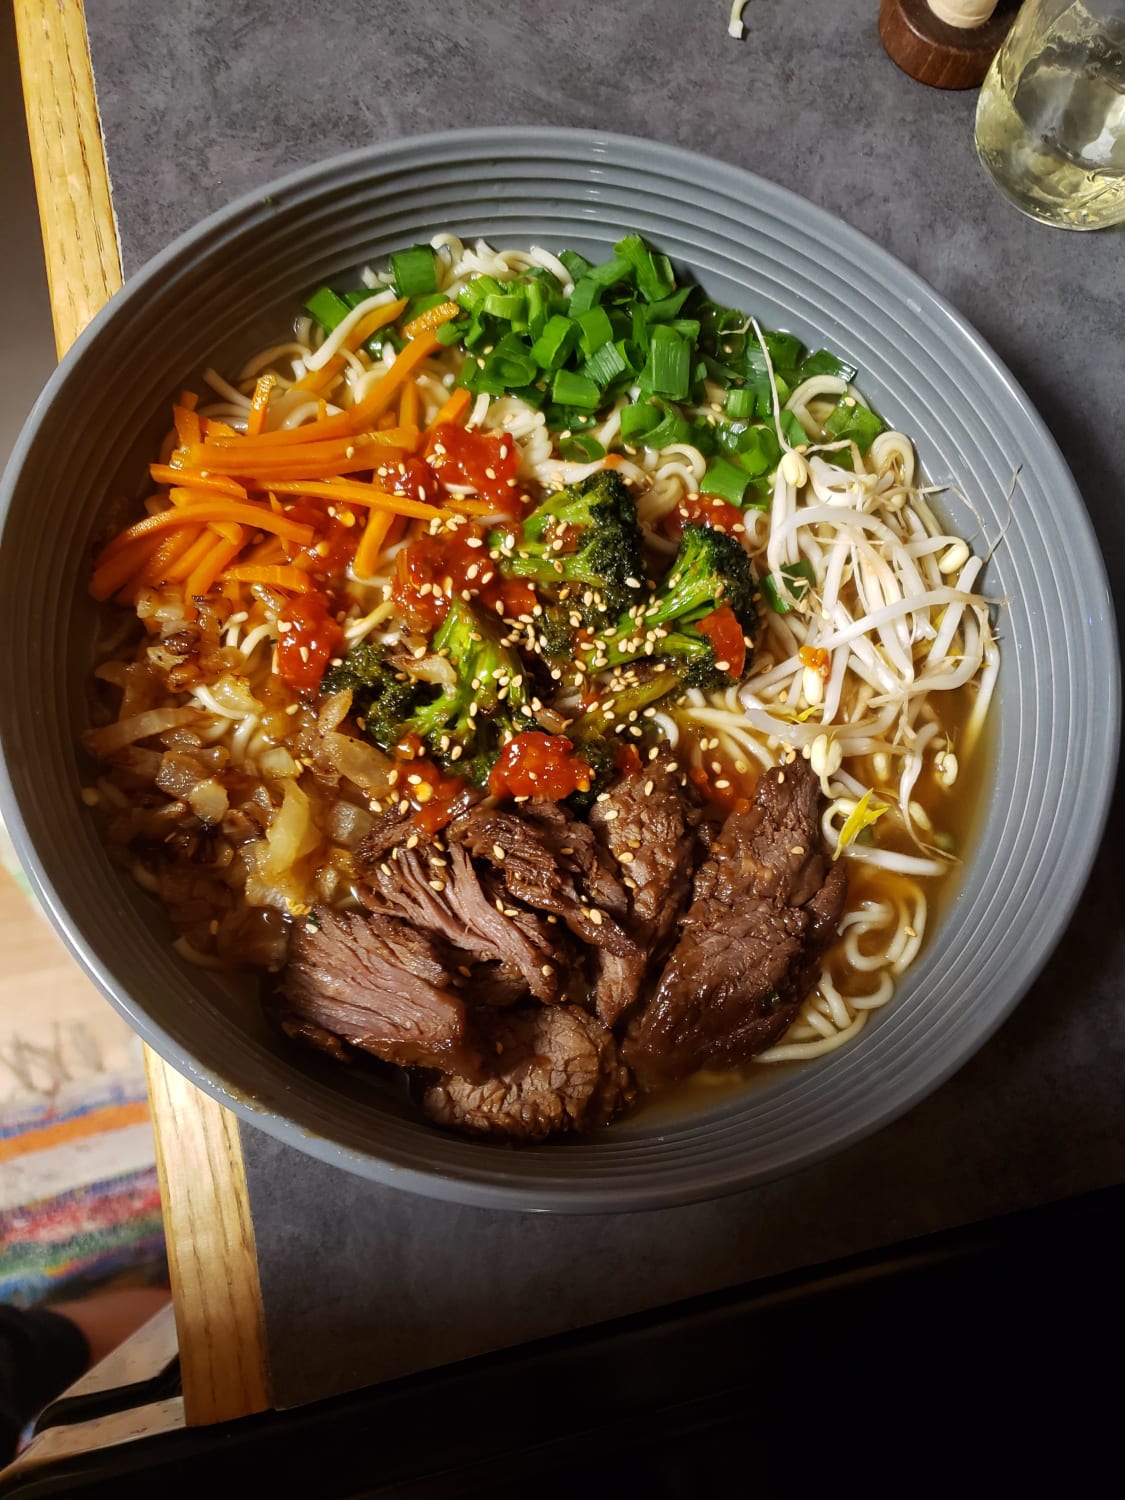 Teriyaki beef ramen with sautéed onions, broccoli, fresh bean sprouts and scallions. Drizzled with roasted chili and garlic paste.